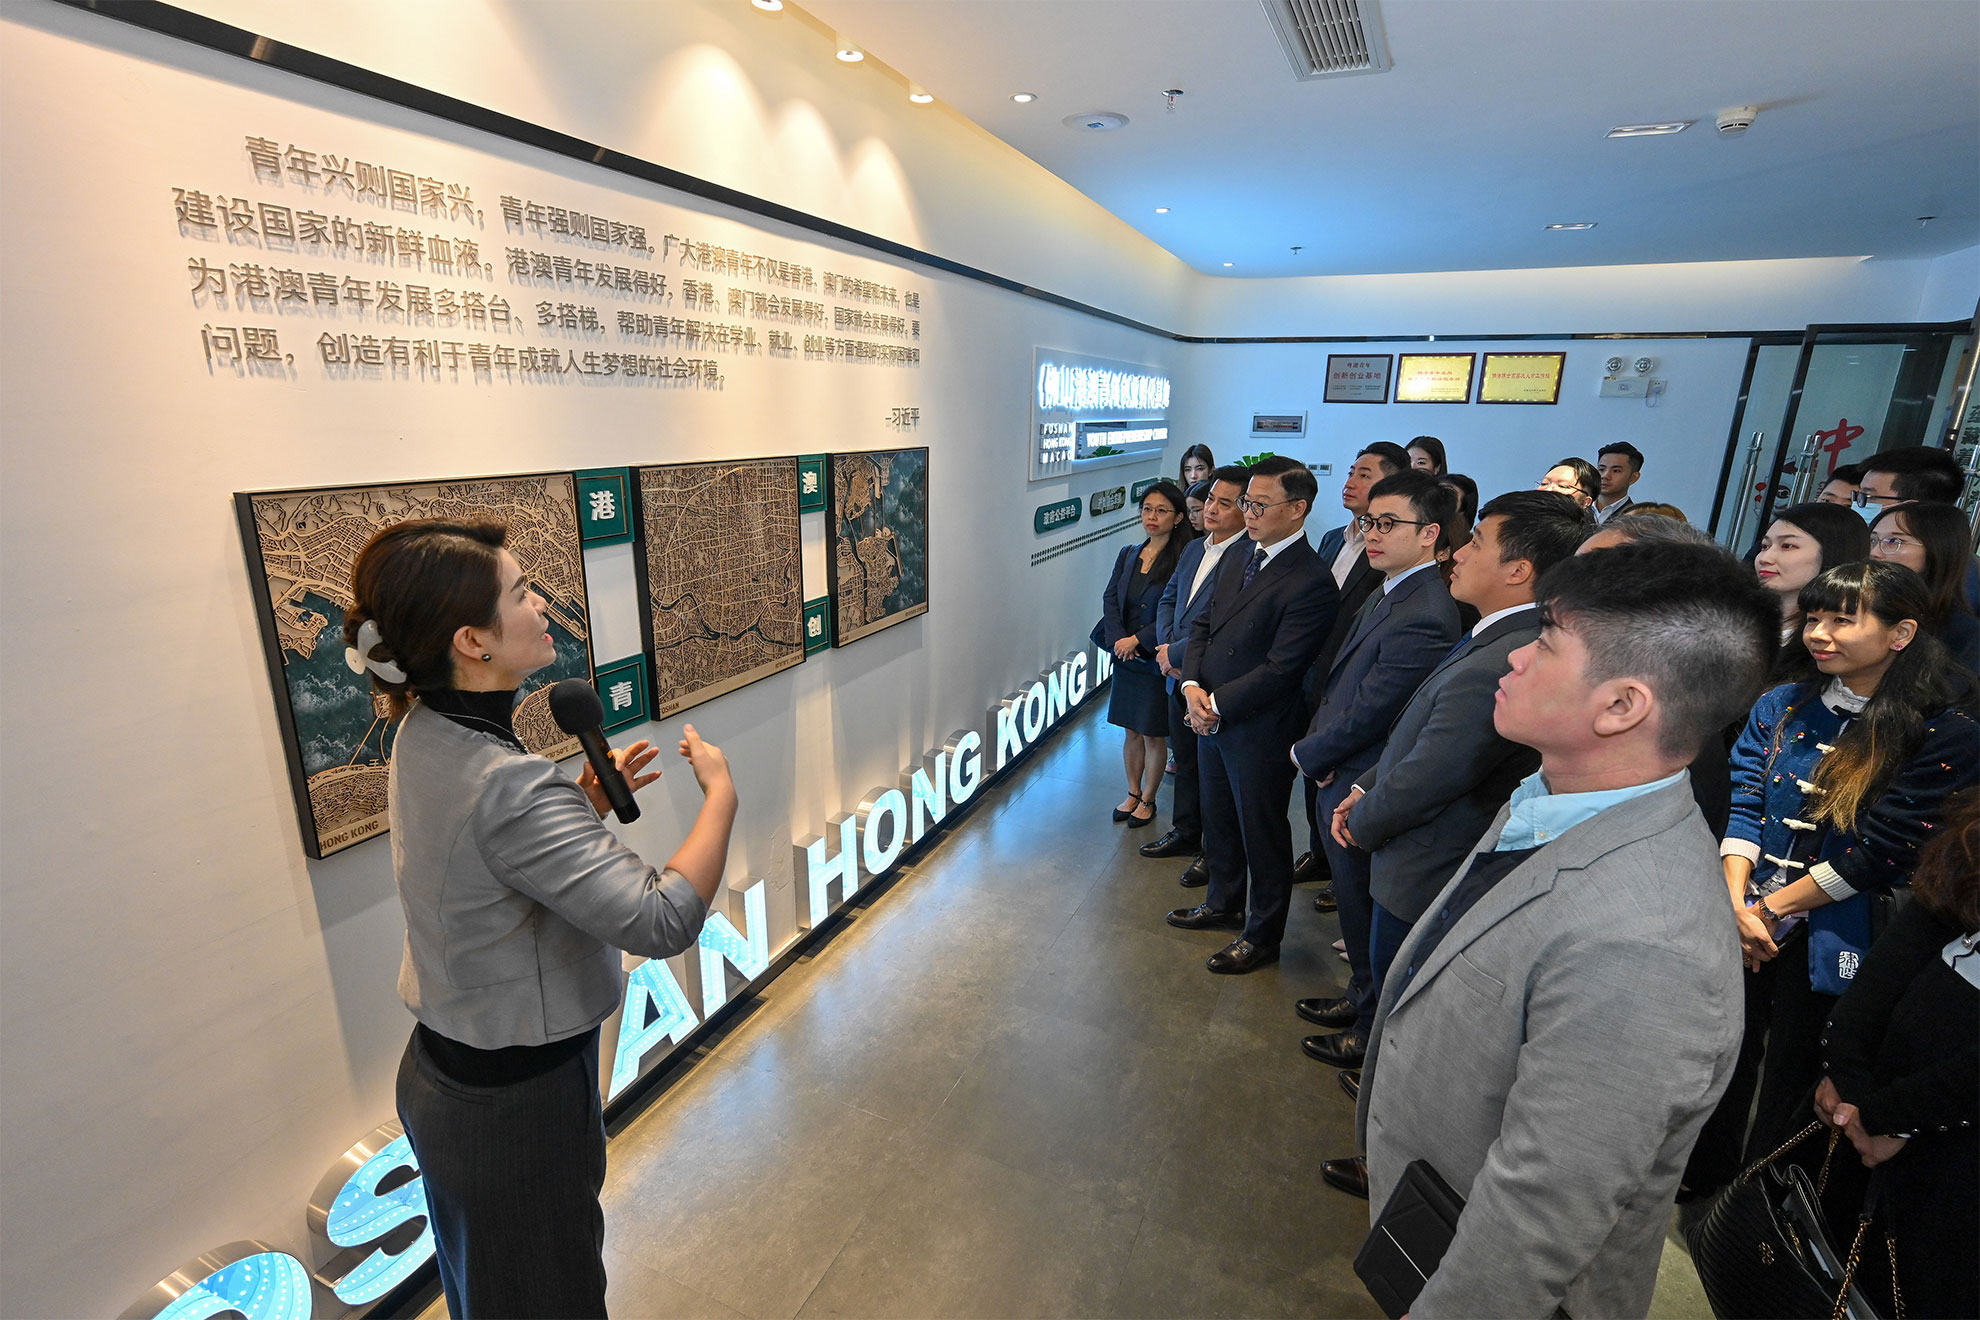 The Deputy Secretary for Justice, Mr Cheung Kwok-kwan (first row, fourth right) and a delegation of young lawyers led by him today (November 18) visited the Foshan Hong Kong-Macao Youth Entrepreneurship Center.